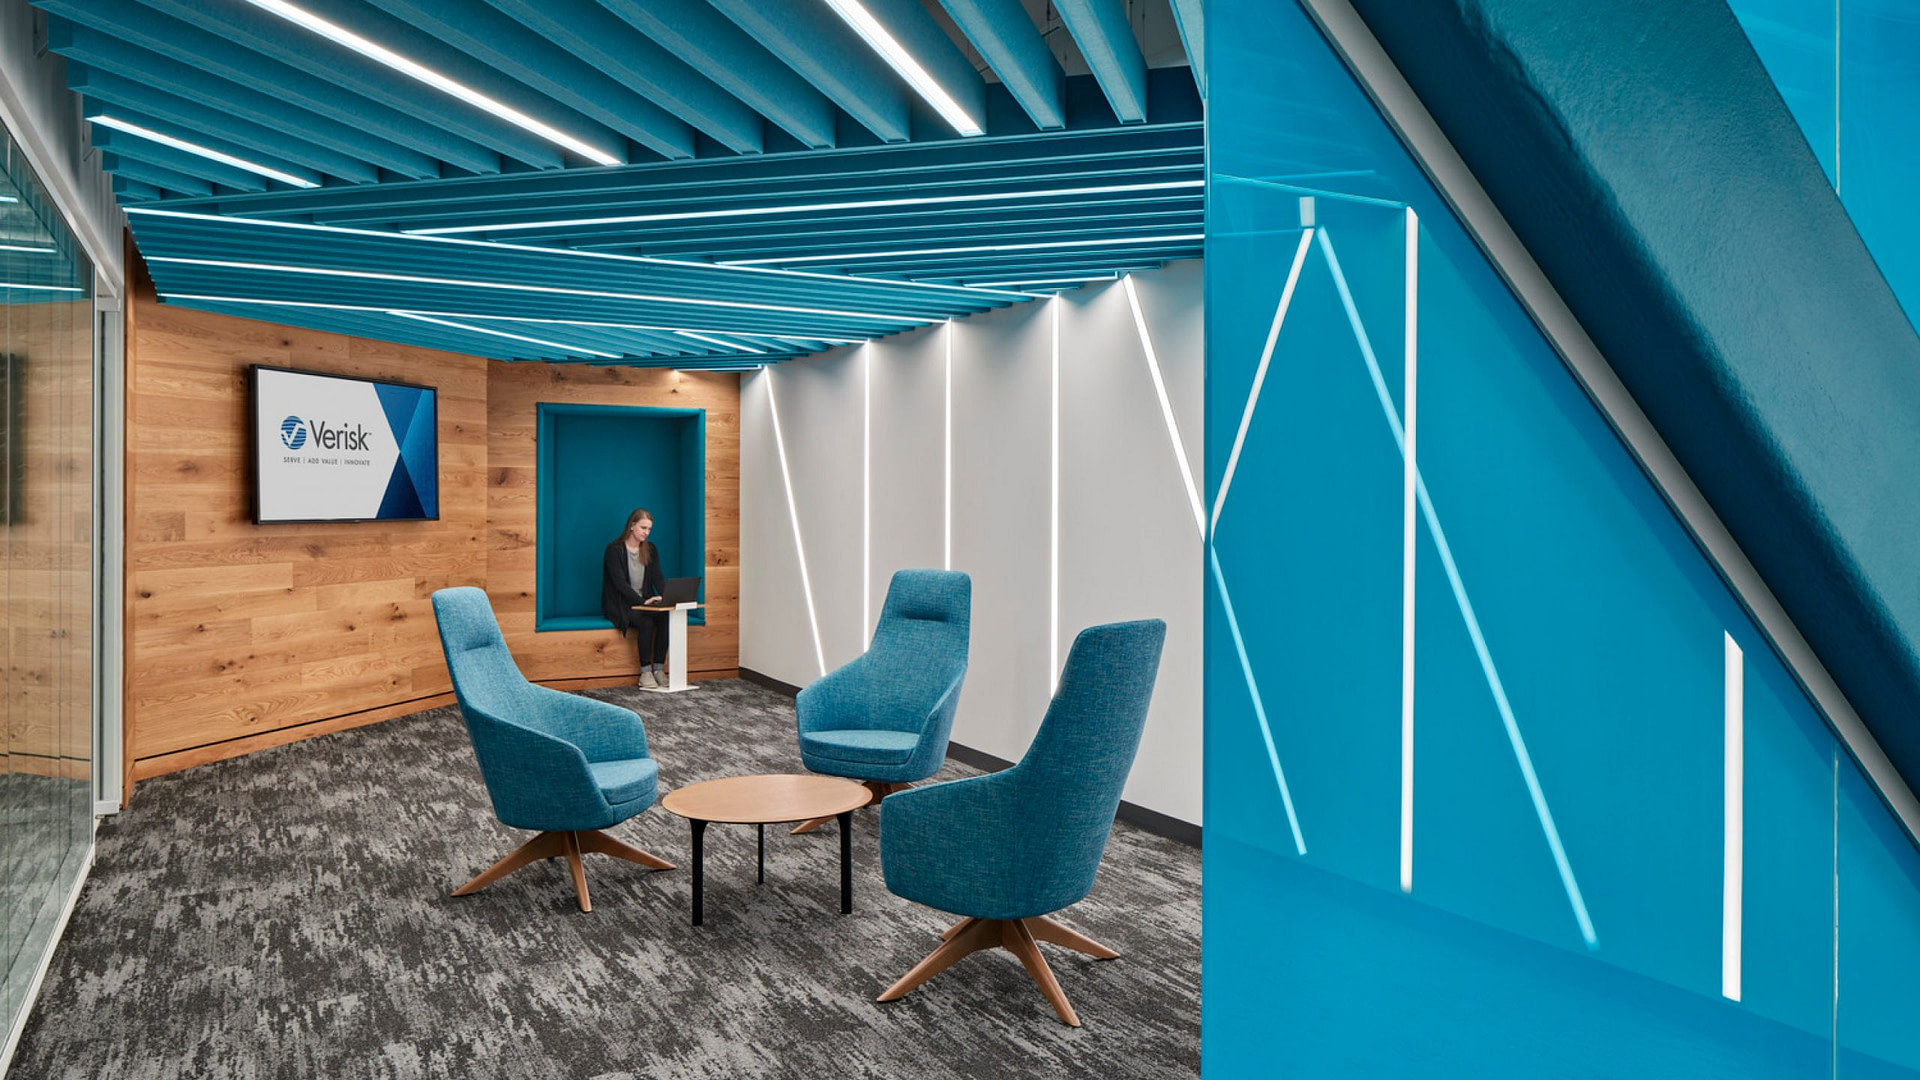 A flexible meeting and workspace at the Verisk offices.